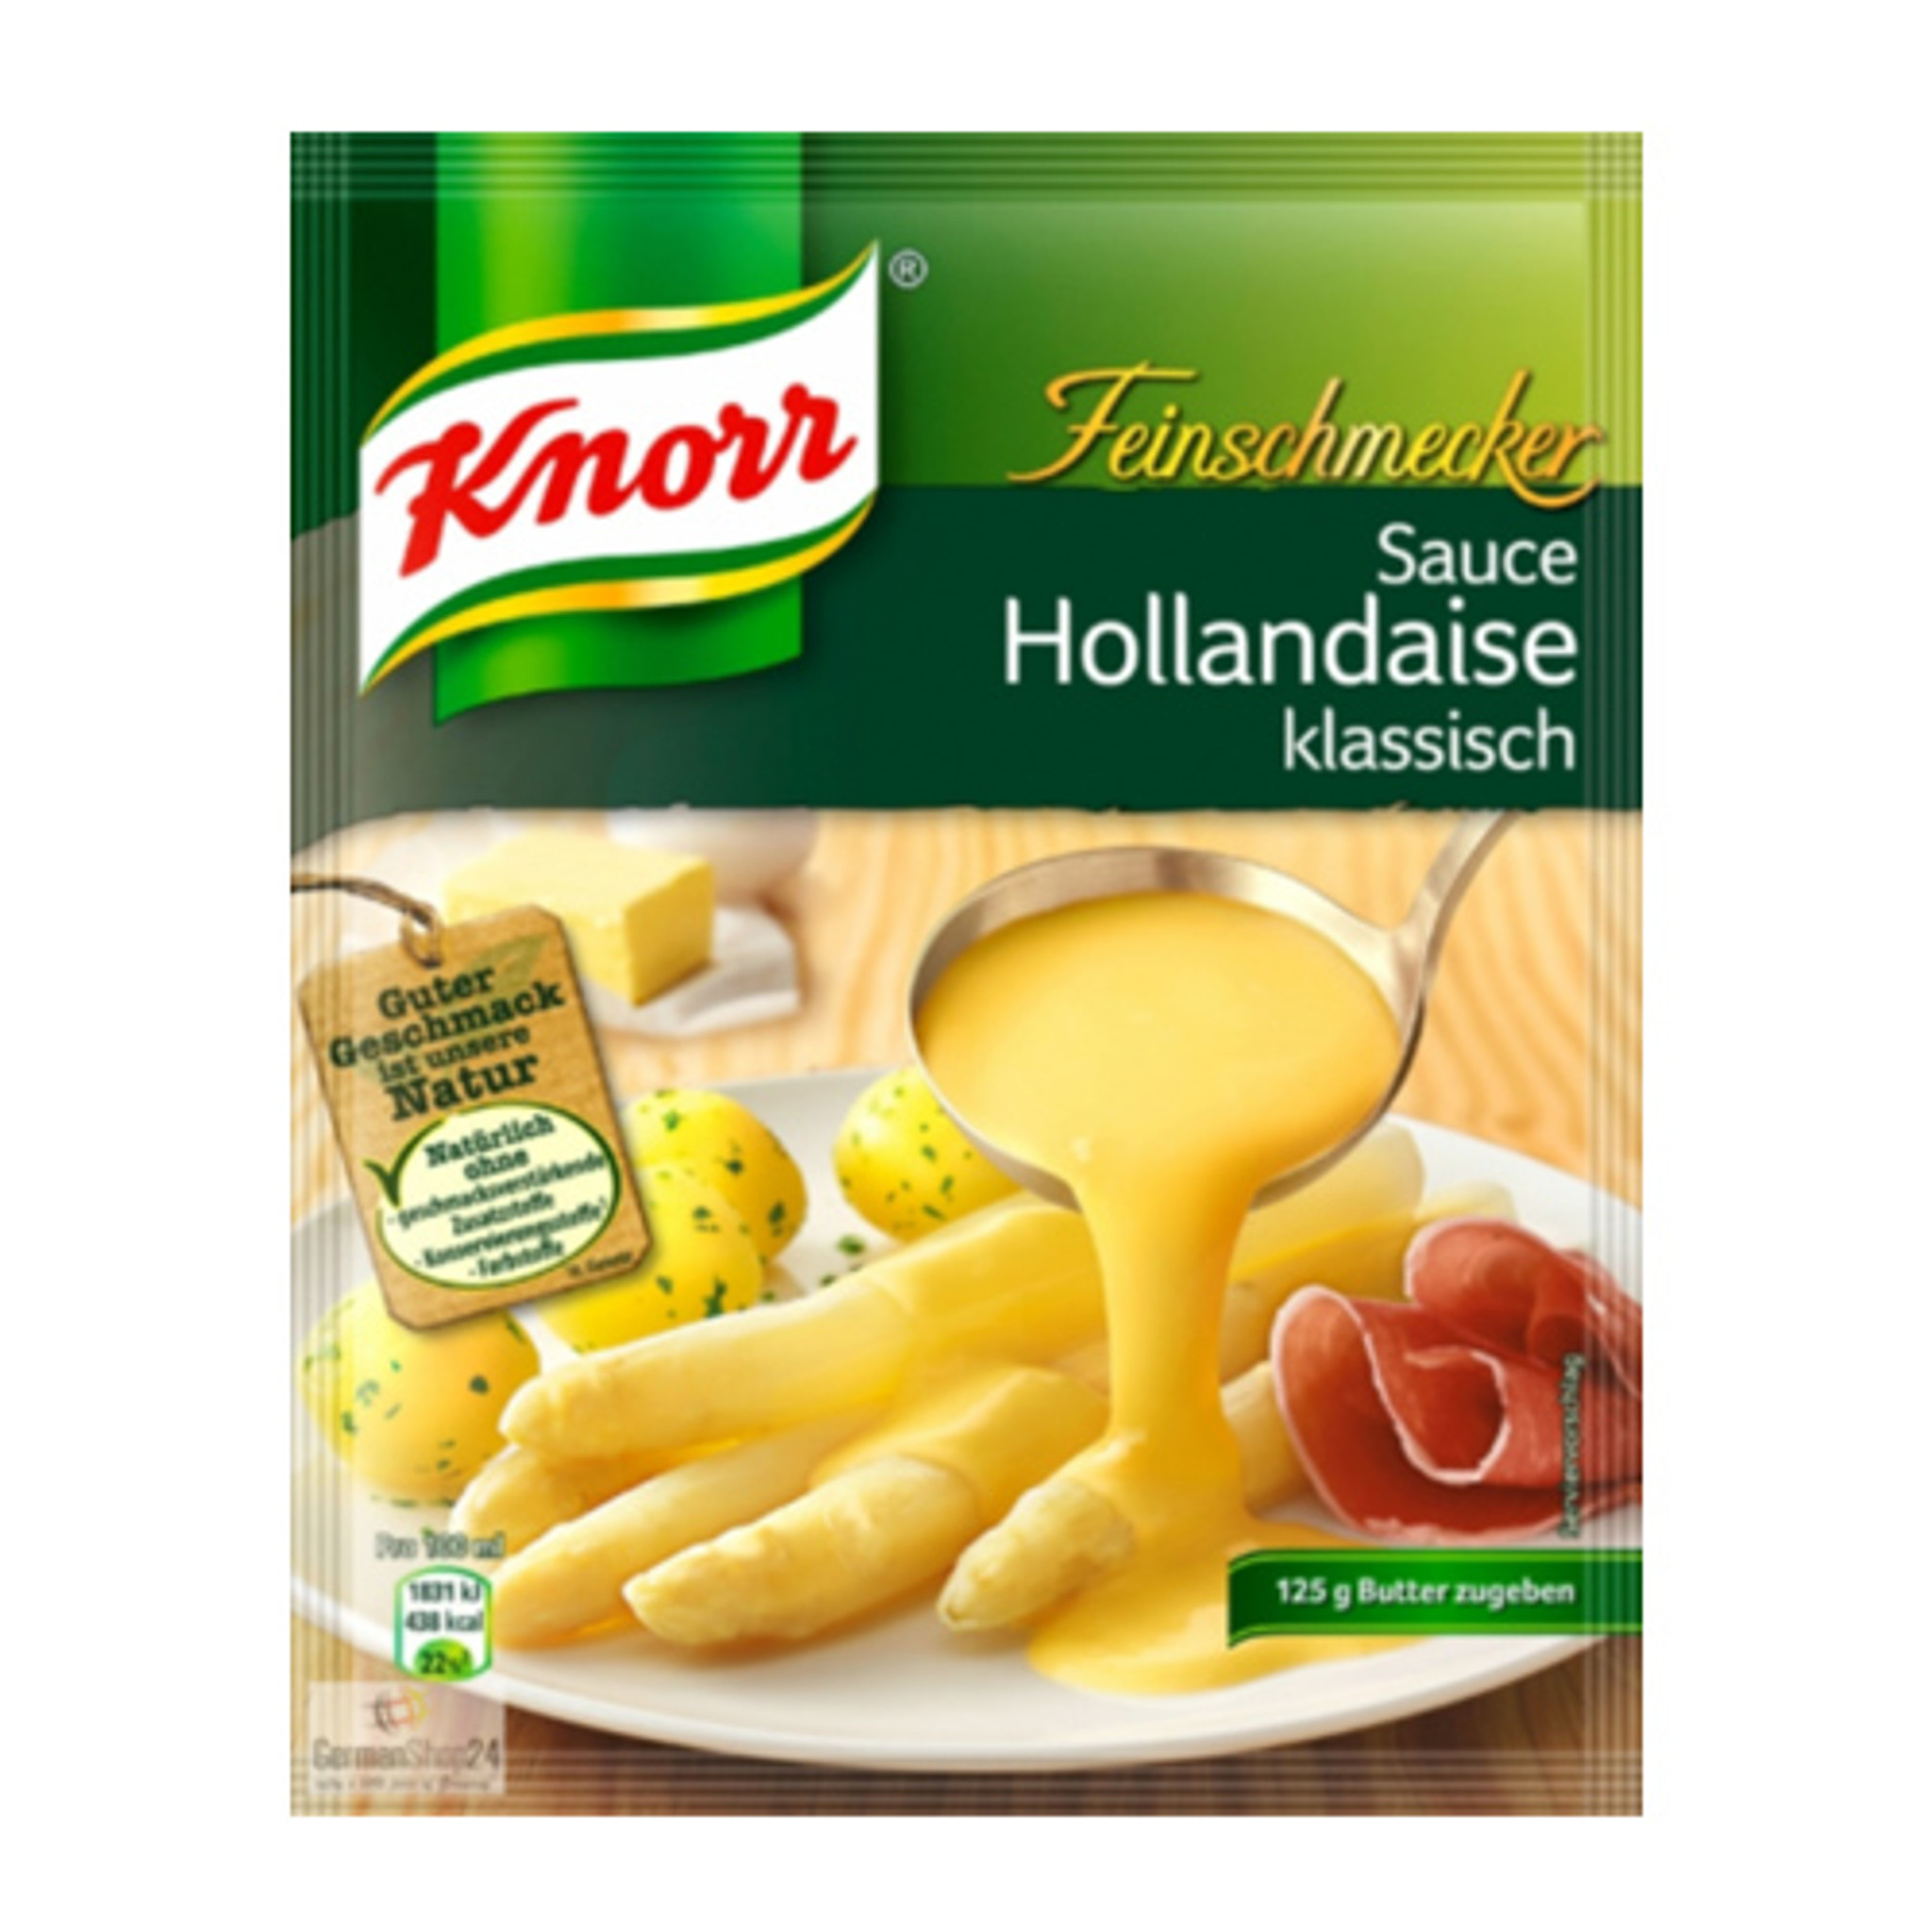 Knorr "Feinschmecker" Hollandaise Sauce Mix oz - Made in Germany - The Taste of Germany